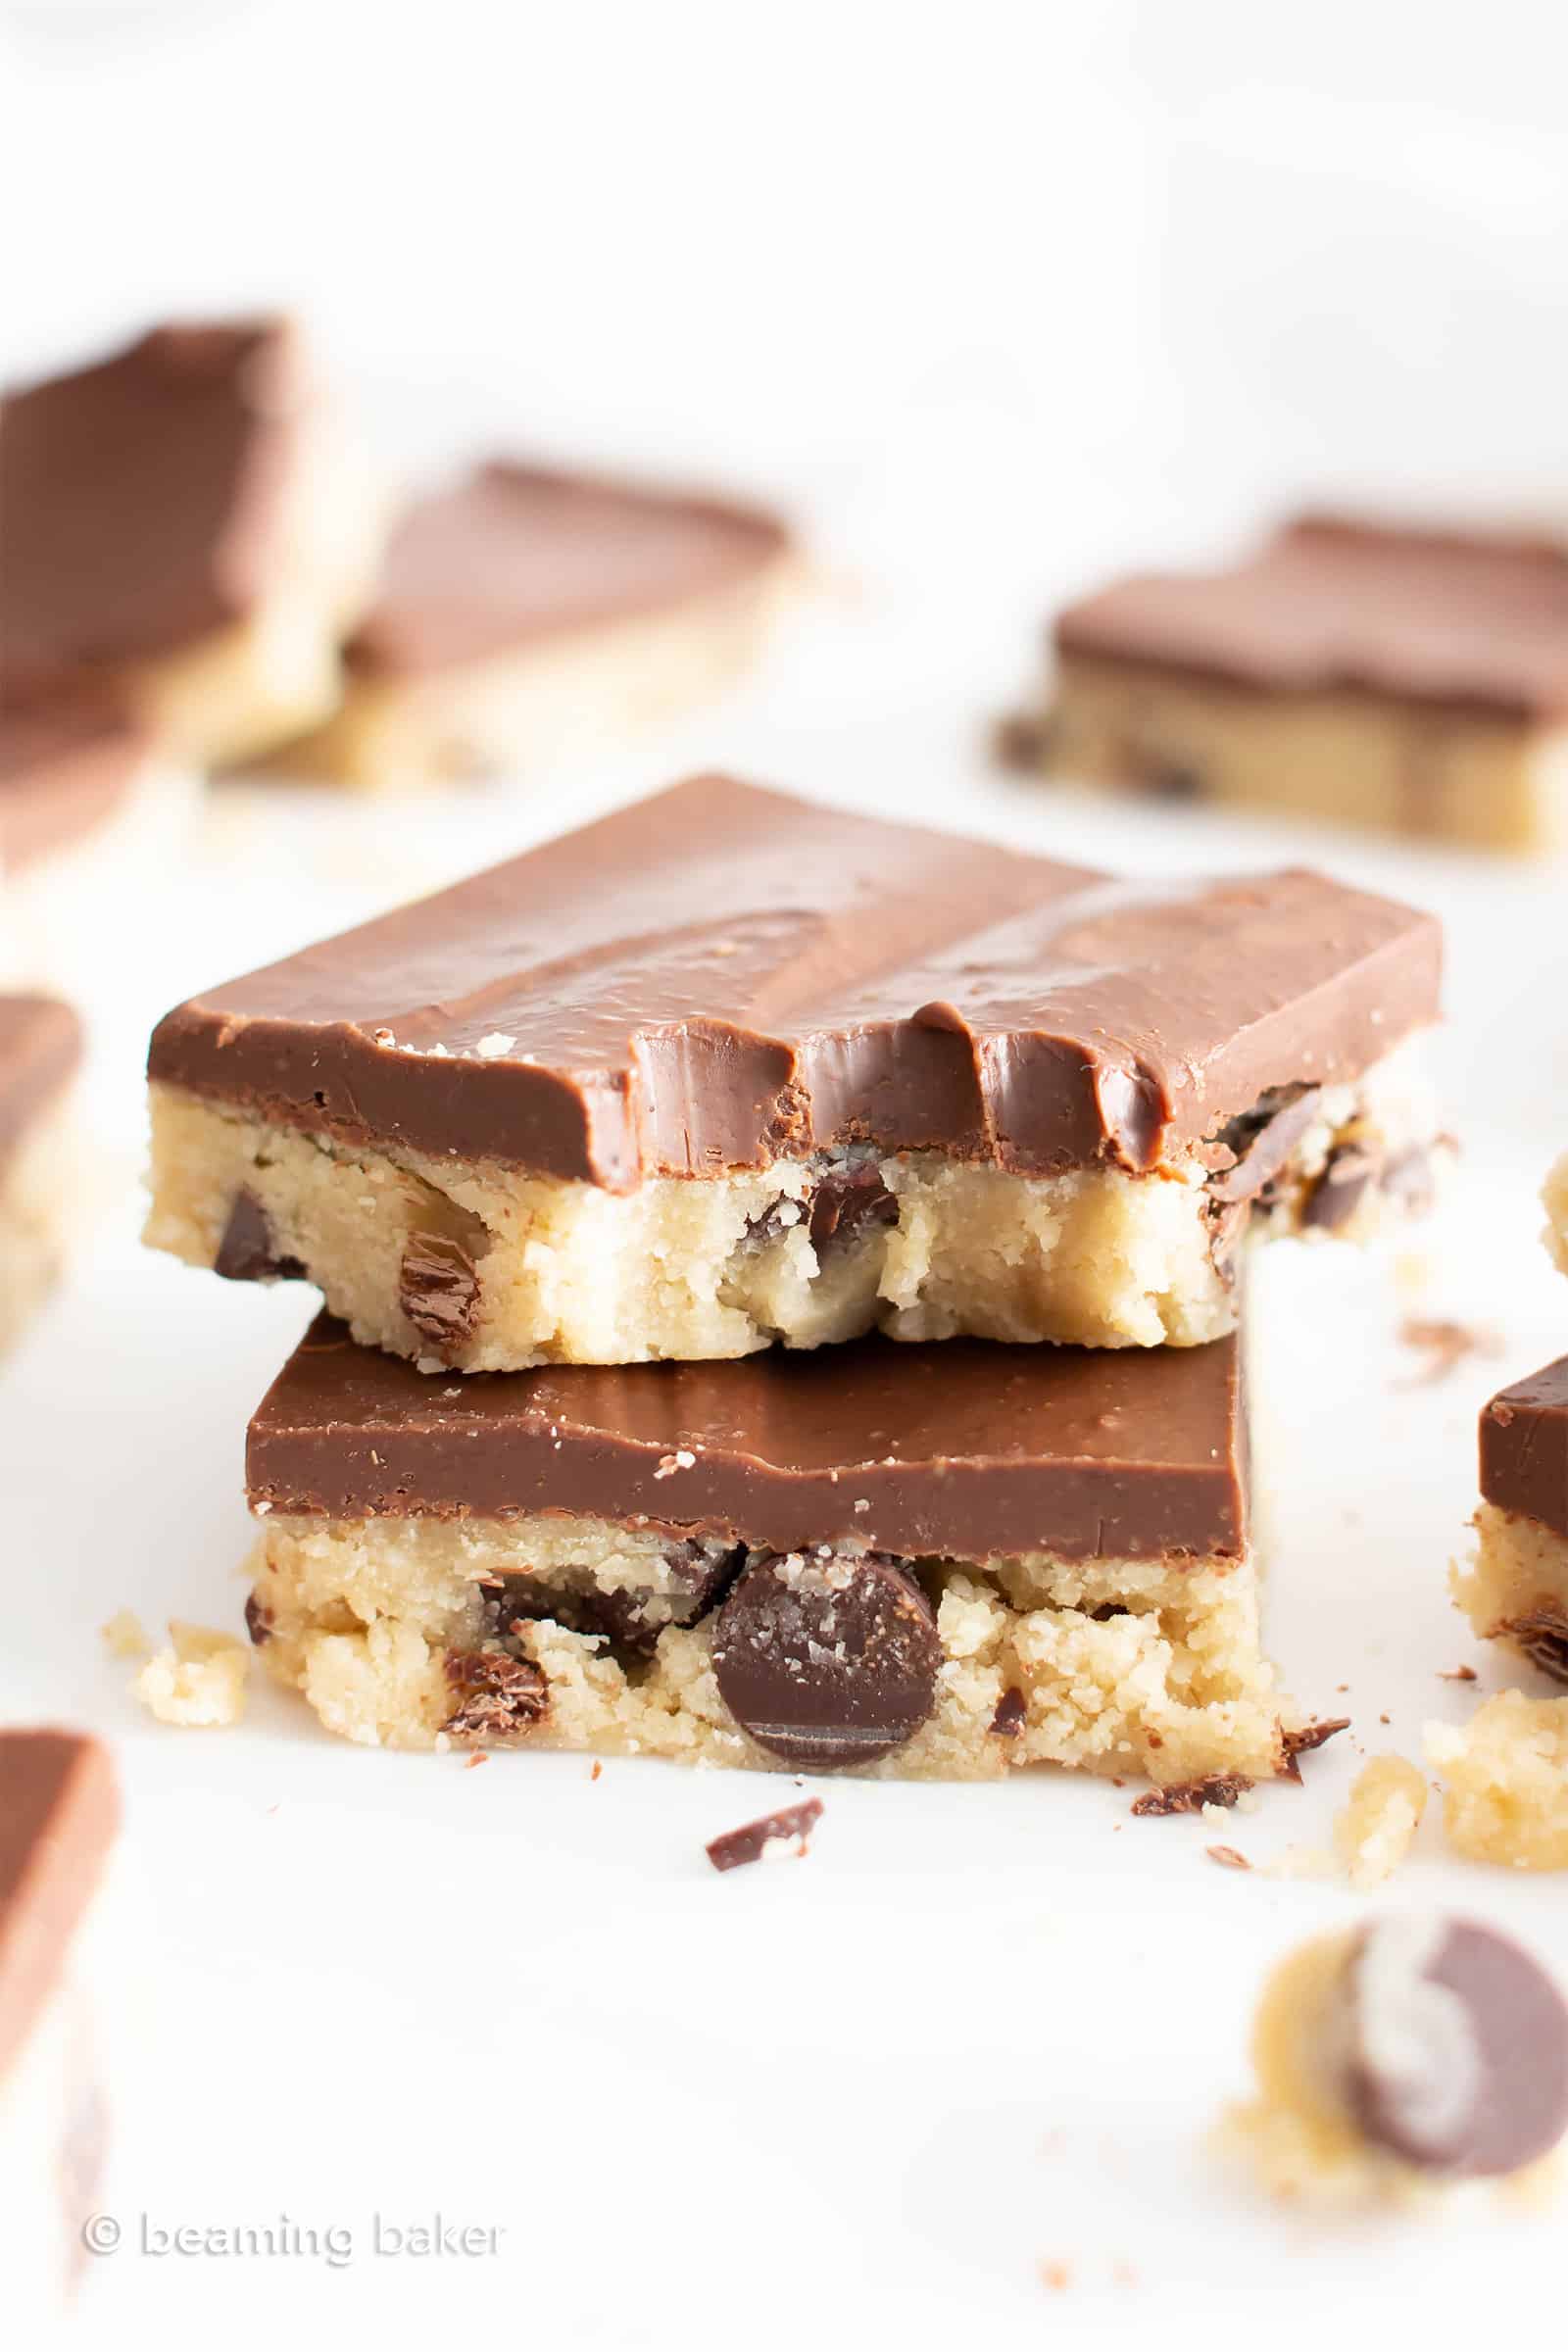 Paleo Cookie Dough Bars (GF): this almond flour cookie dough recipe is delicious & gluten free! Safe to eat & edible, no need to bake. Egg-Free, Vegan, Dairy-Free, Refined Sugar-Free. #Vegan #Paleo #CookieDough #Chocolate | Recipe at BeamingBaker.com